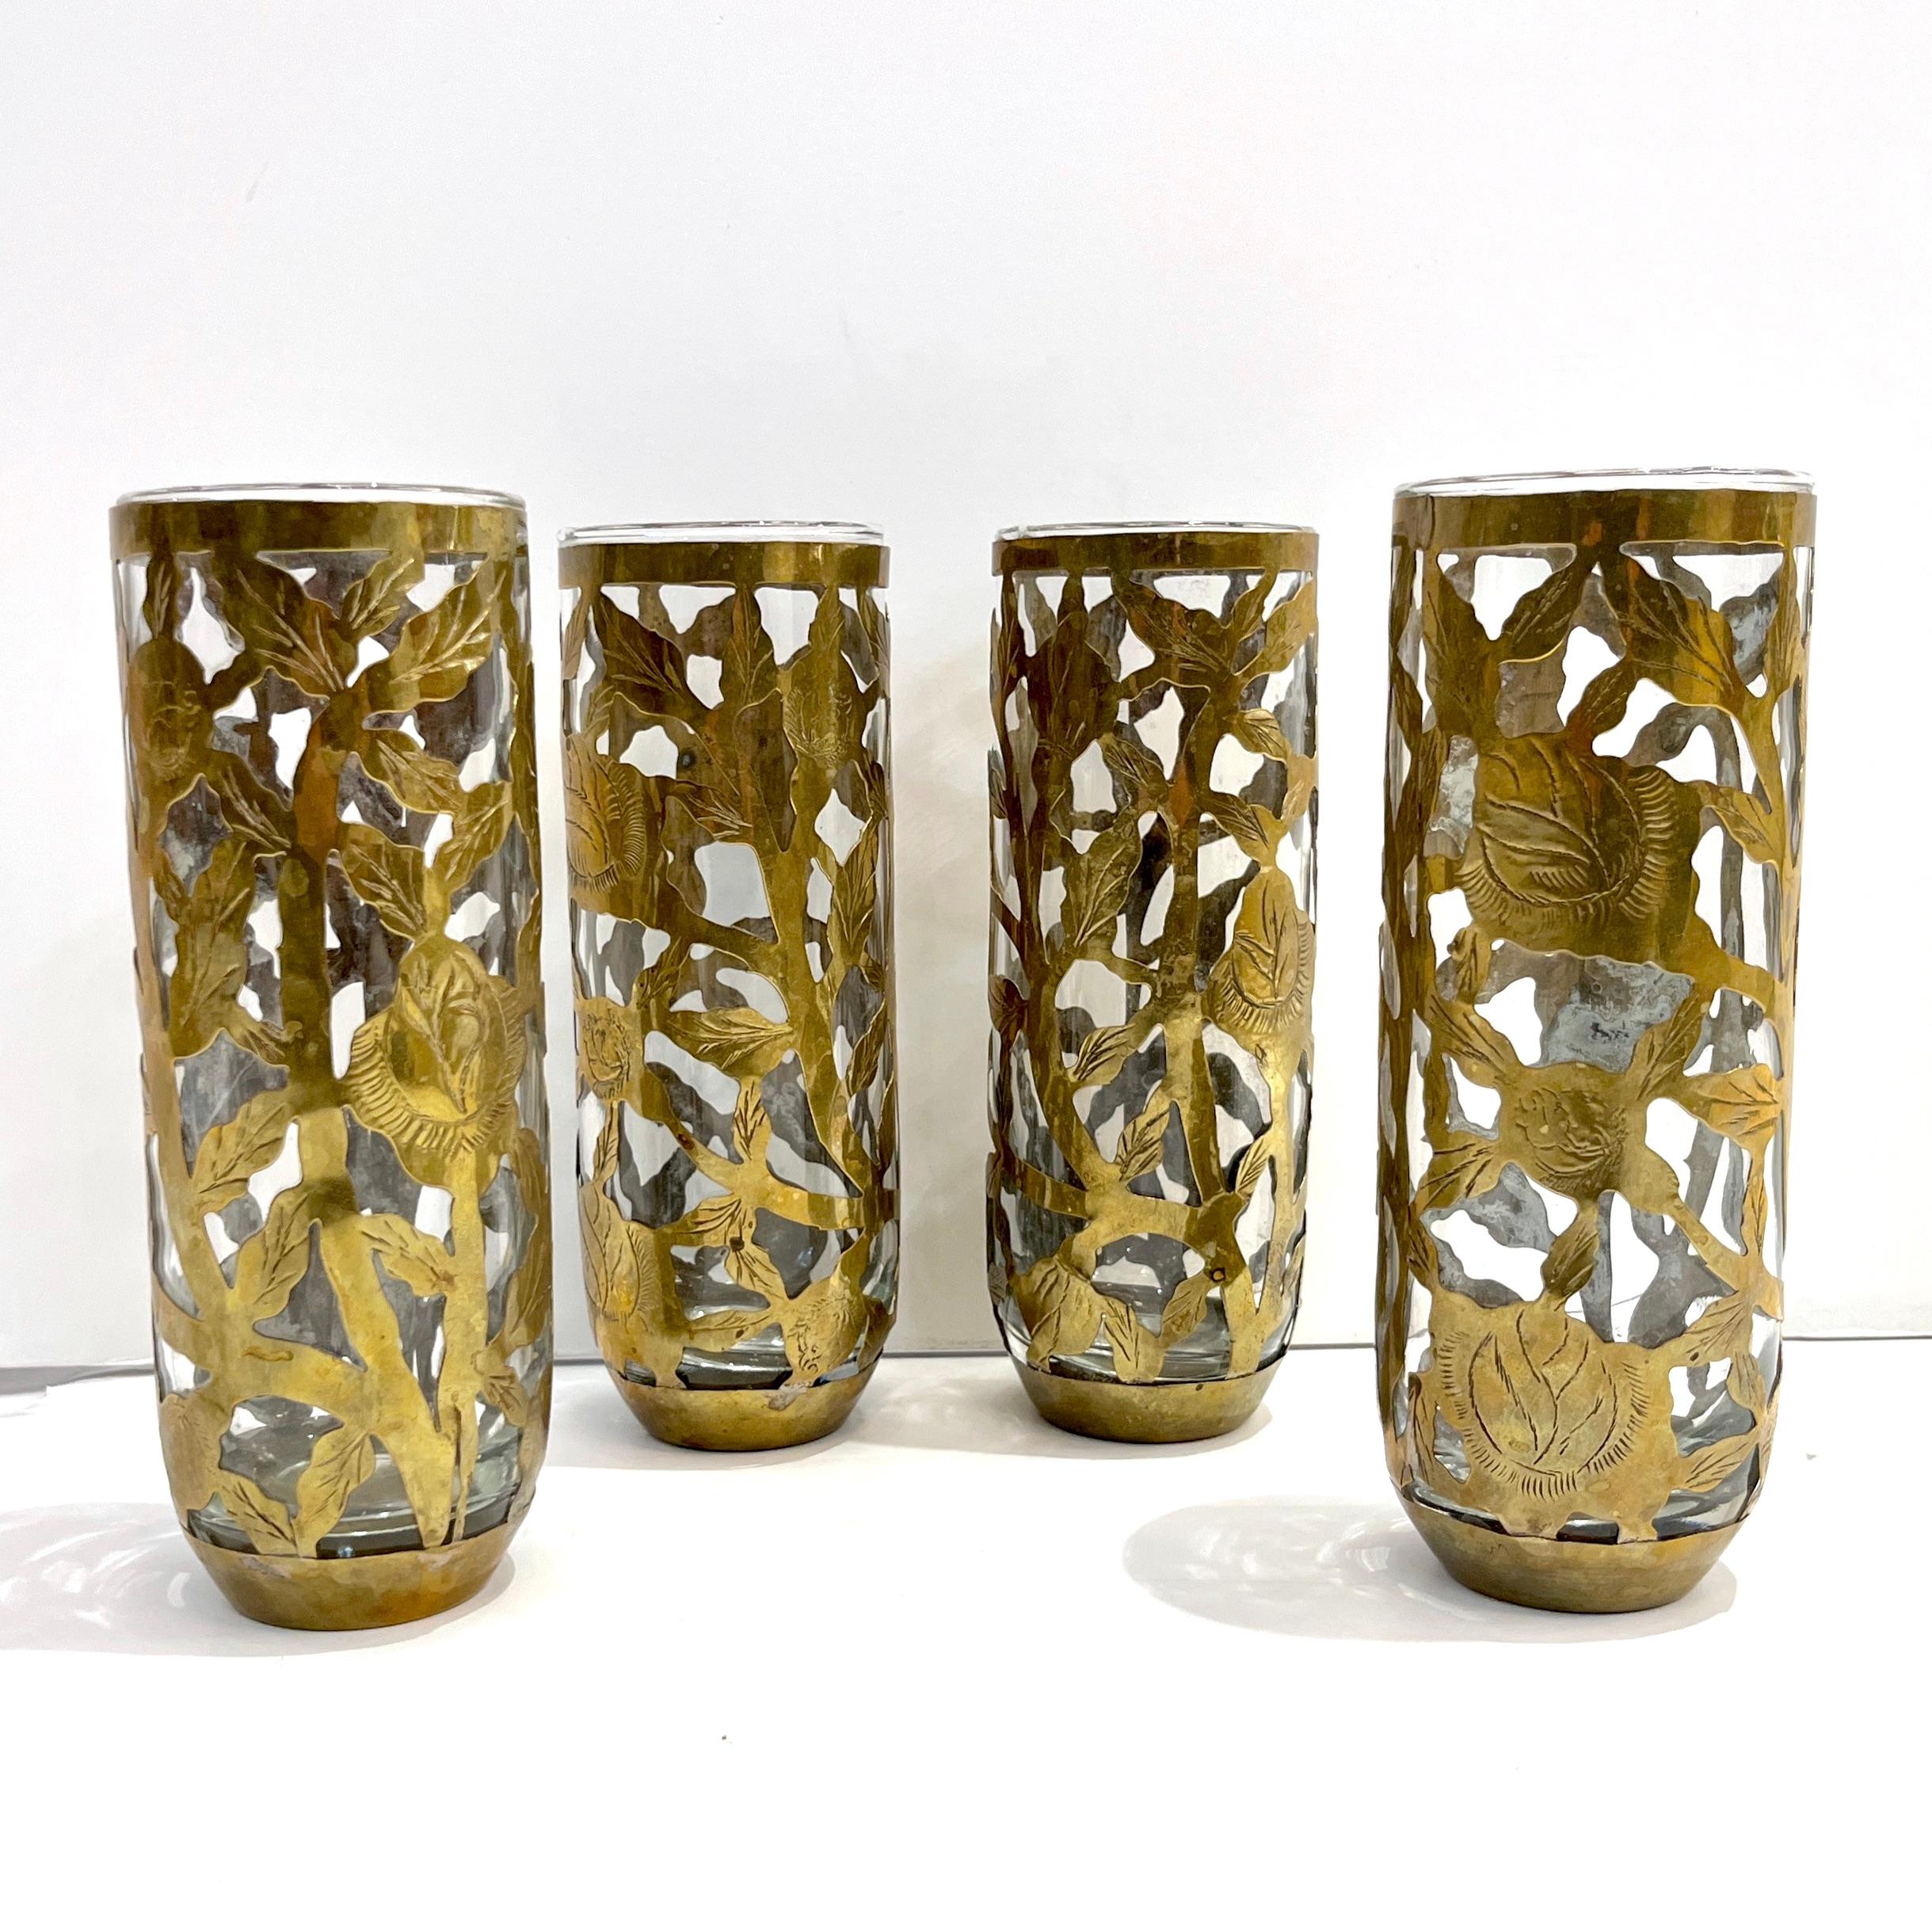 1960s mid-20th century set of 4 organic glasses, entirely handcrafted in Mexico, overlayed in a handmade antique brass open sheath, ornated with an etched cutwork floral and foliage decor.
Idéal pour le bar, mais aussi comme vase individuel pour les